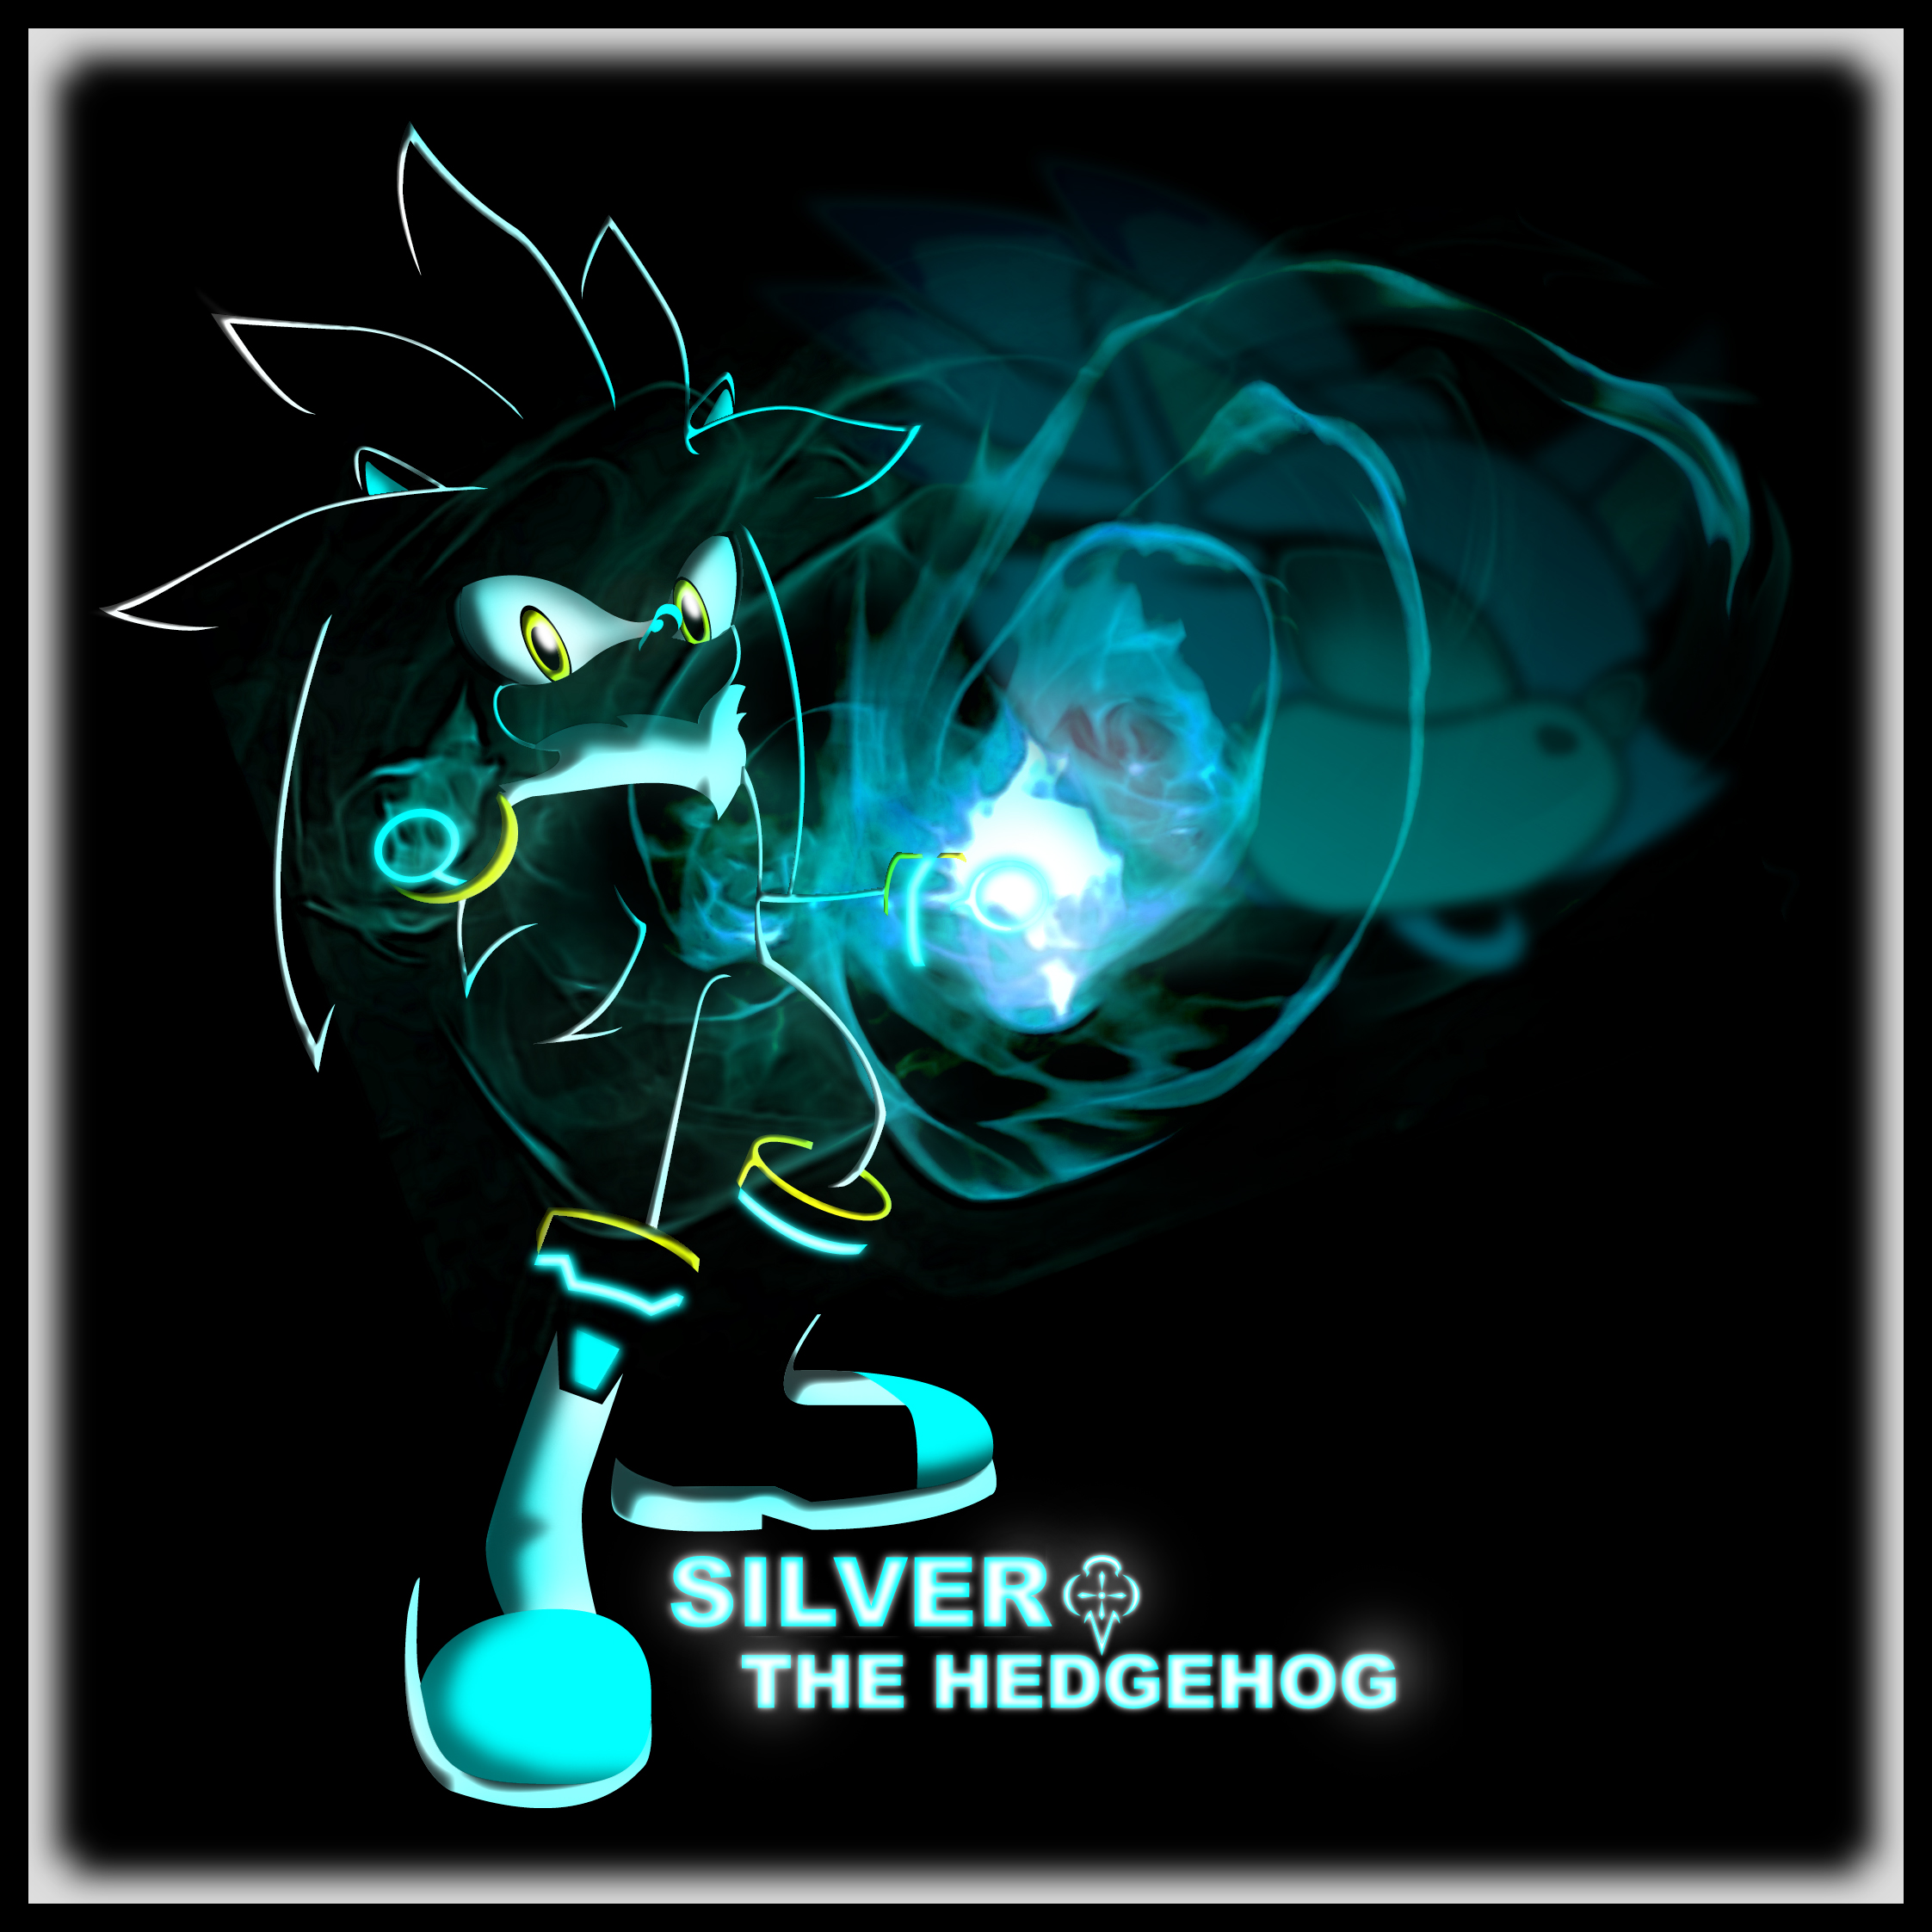 SILVER_THE_HEDGEHOG_by_Fission07.jpg